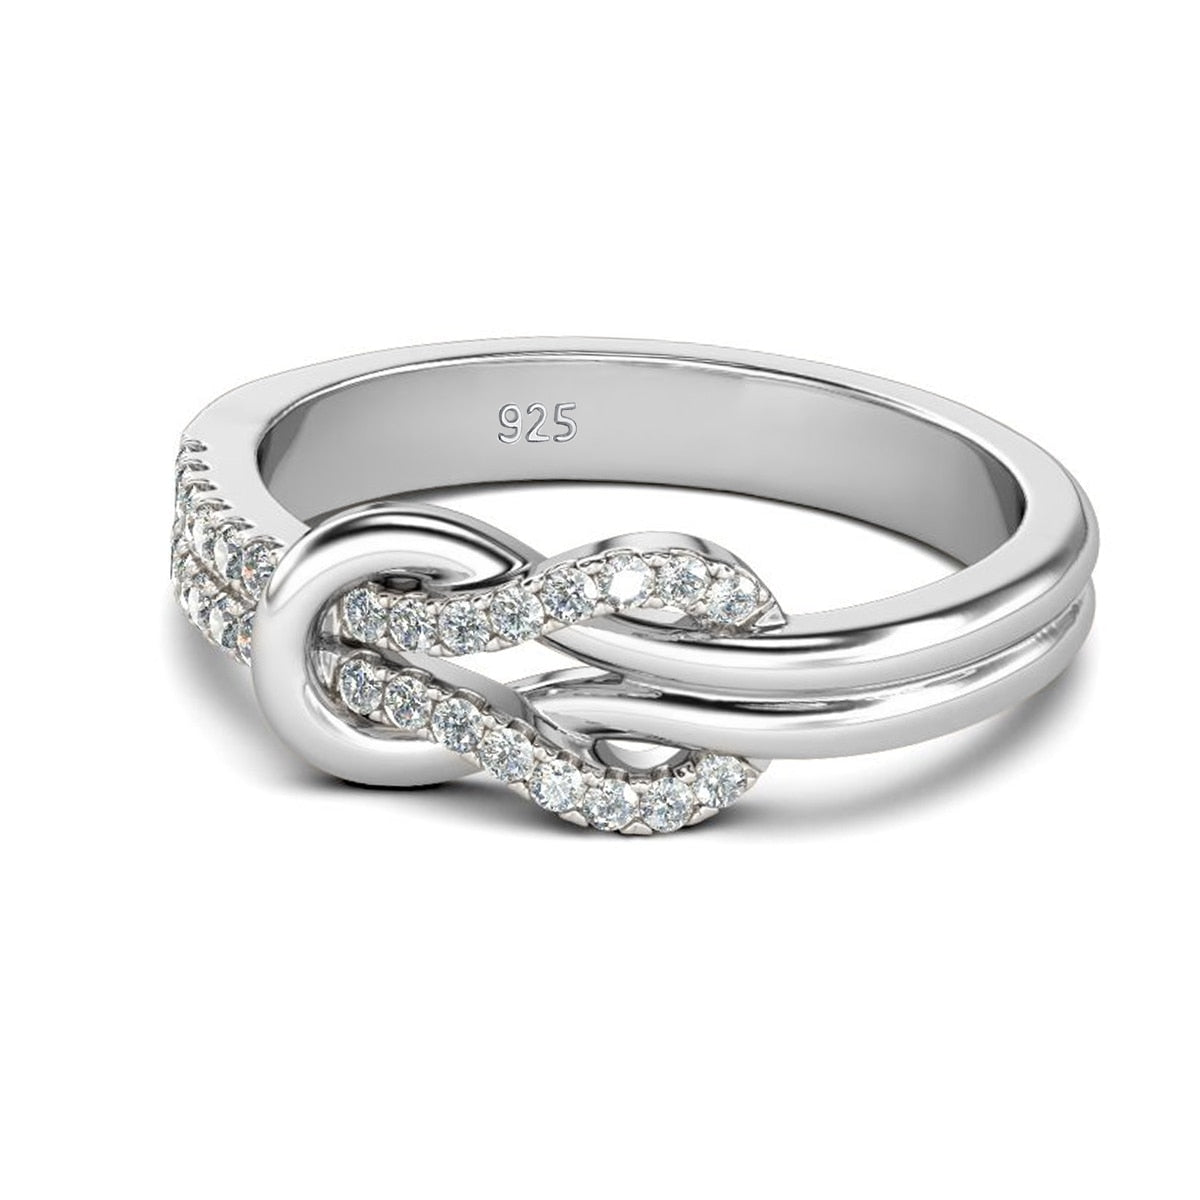 A silver half pave infinity knot ring.